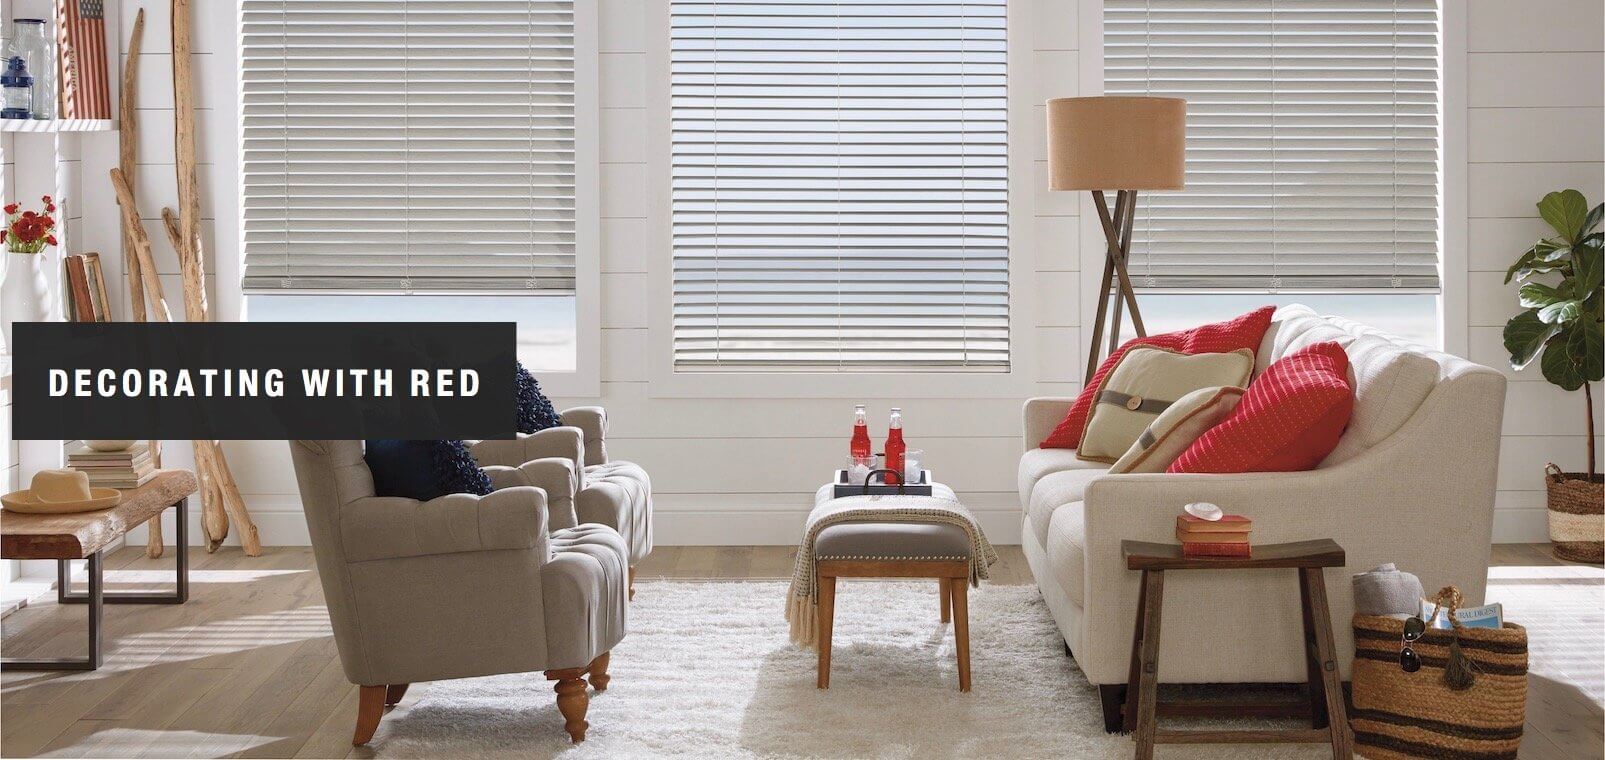 A little bit of red, added to neutrals, can go a long way! Shown with EverWood® TruGrain® blinds.